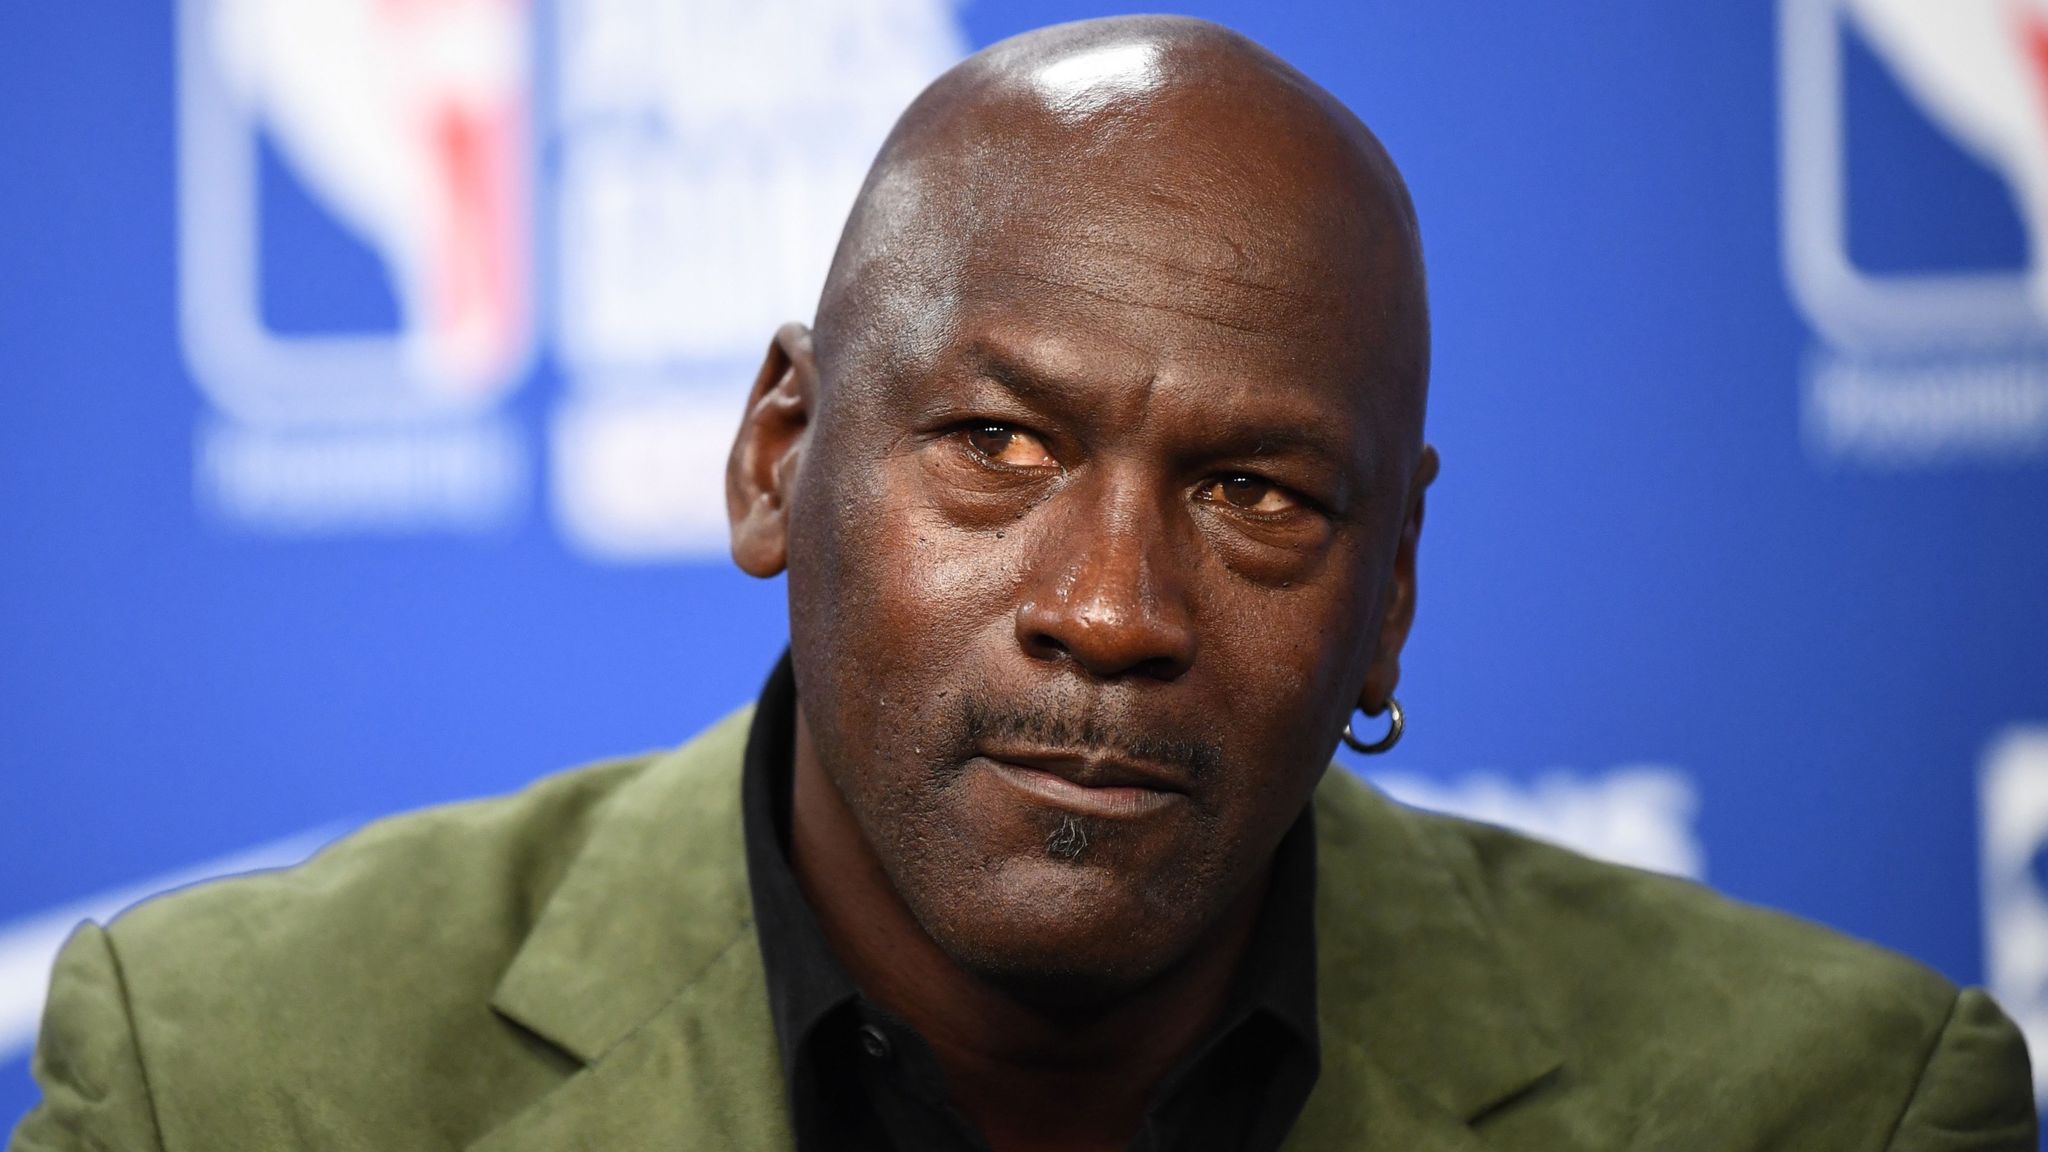 straf Vag Glæd dig Michael Jordan 'truly pained and plain angry' over George Floyd's death |  NBA News | Sky Sports